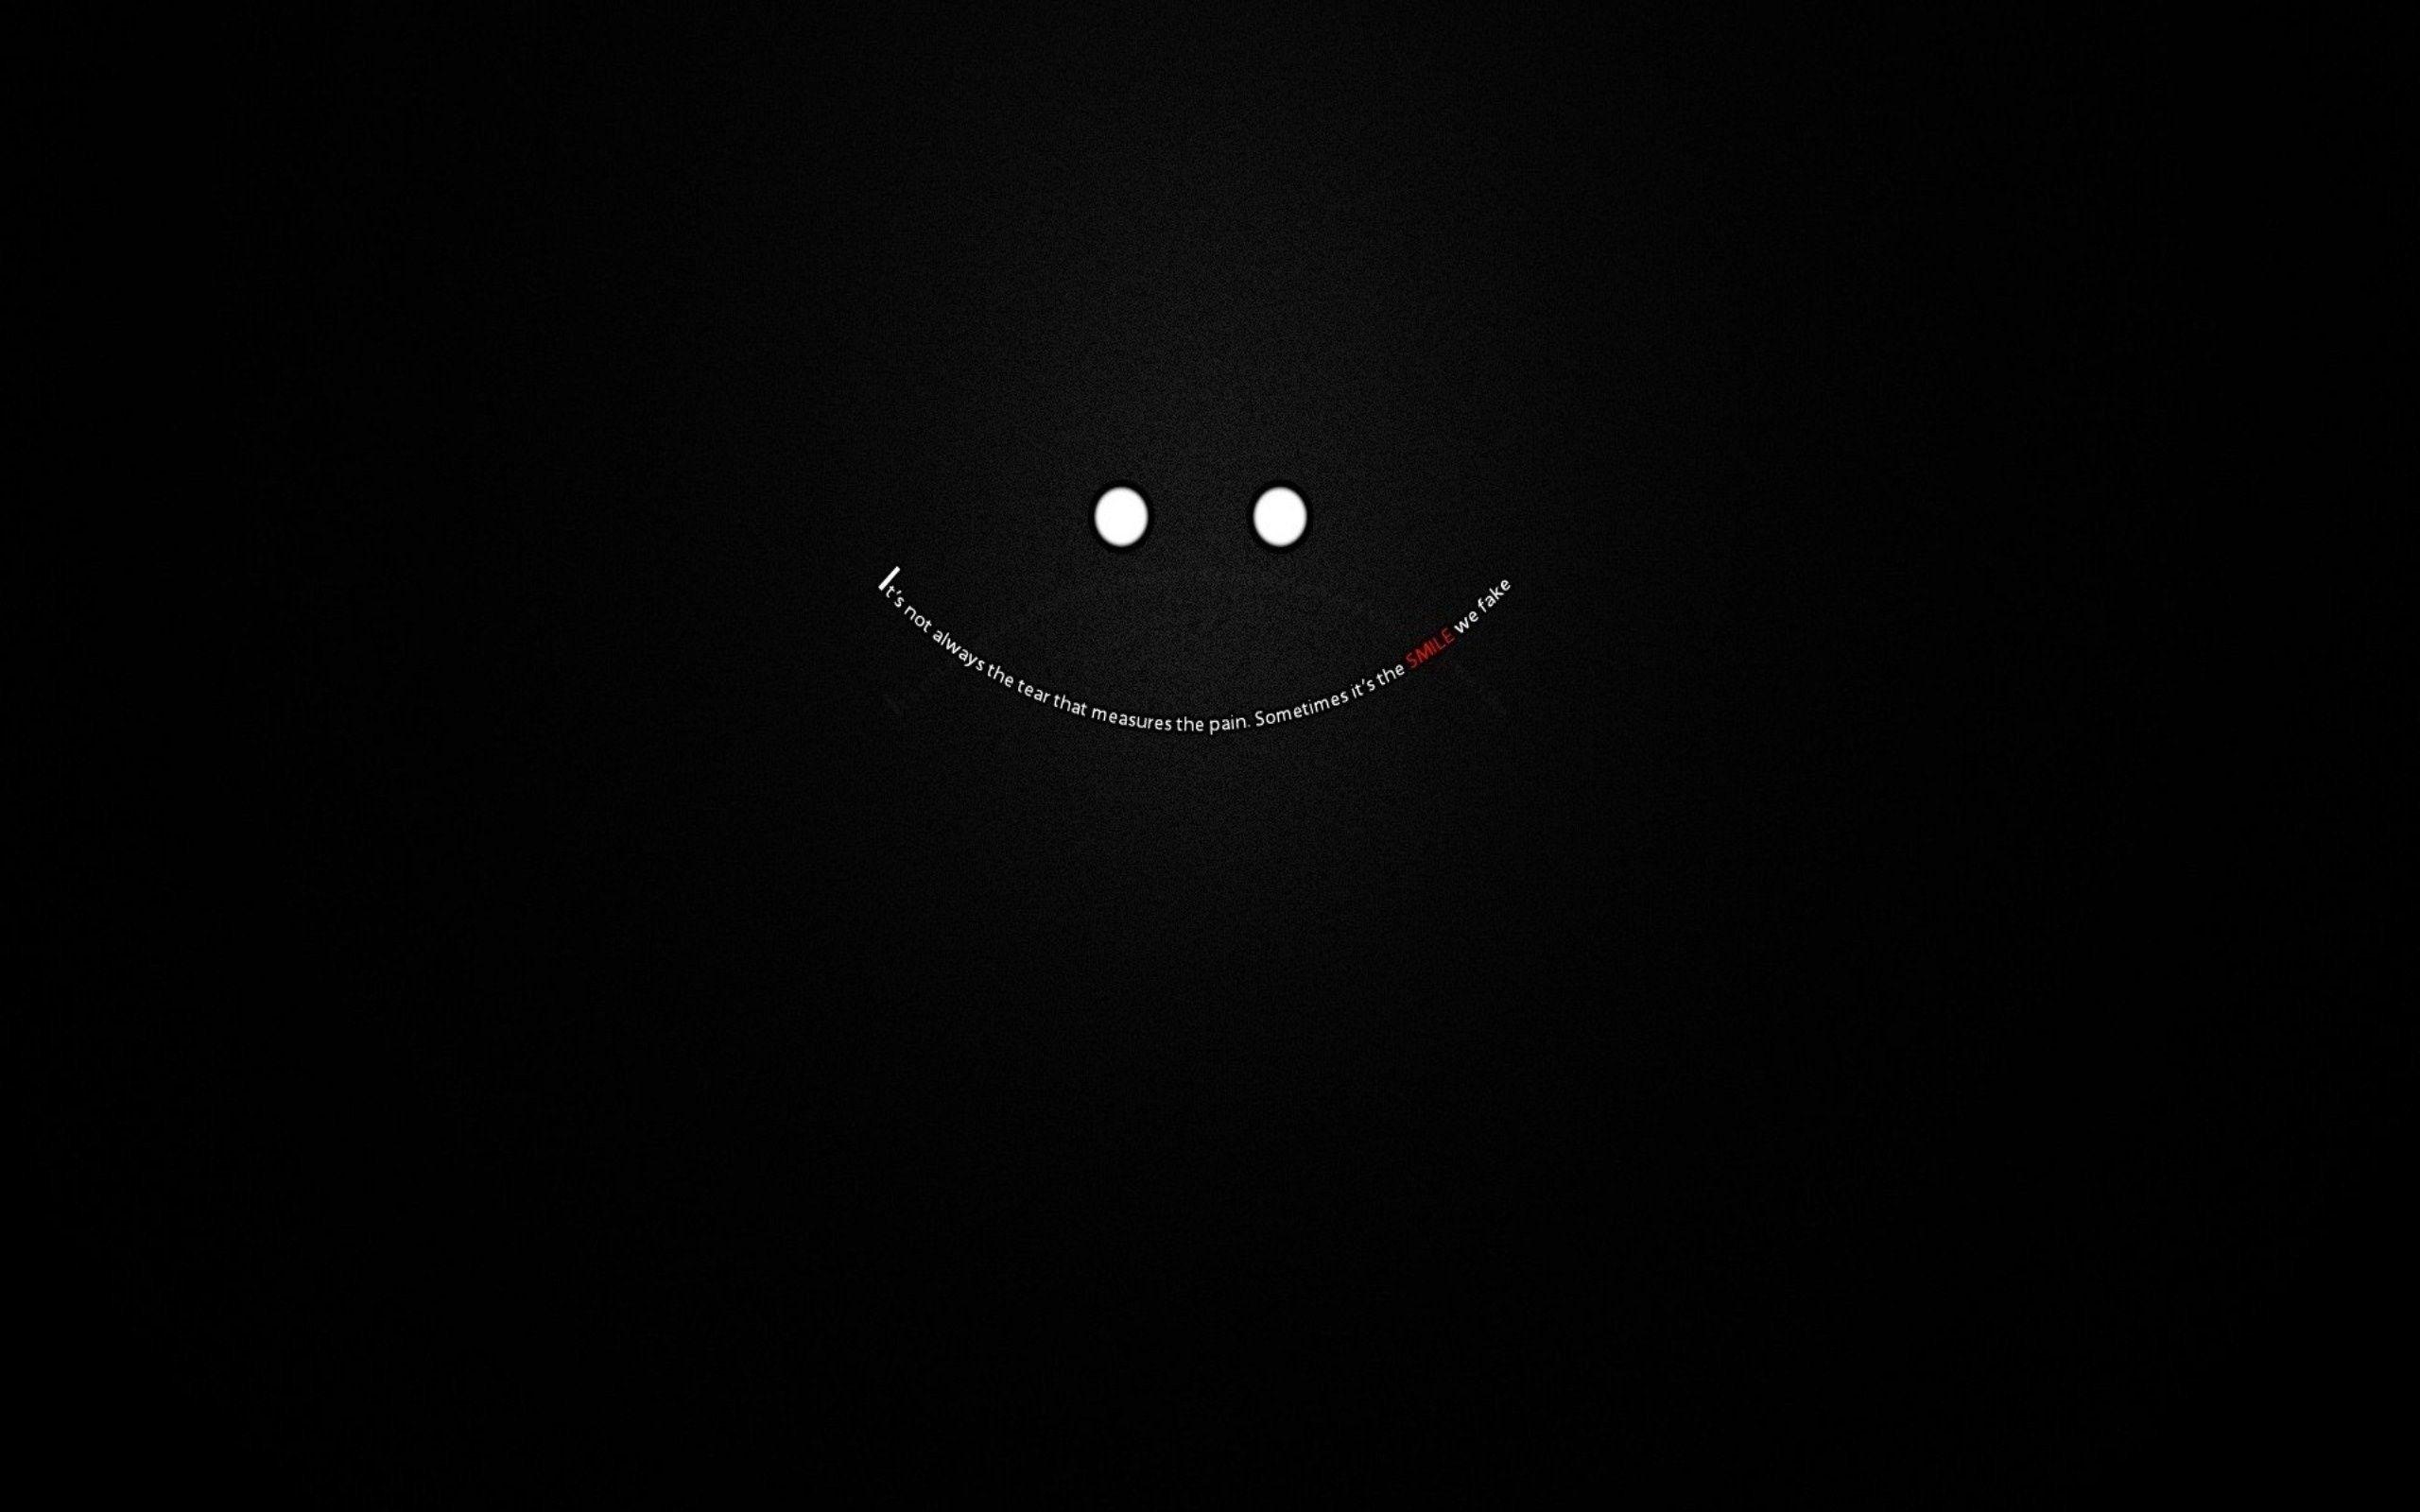 Happy Face Black Wallpapers - Wallpaper Cave